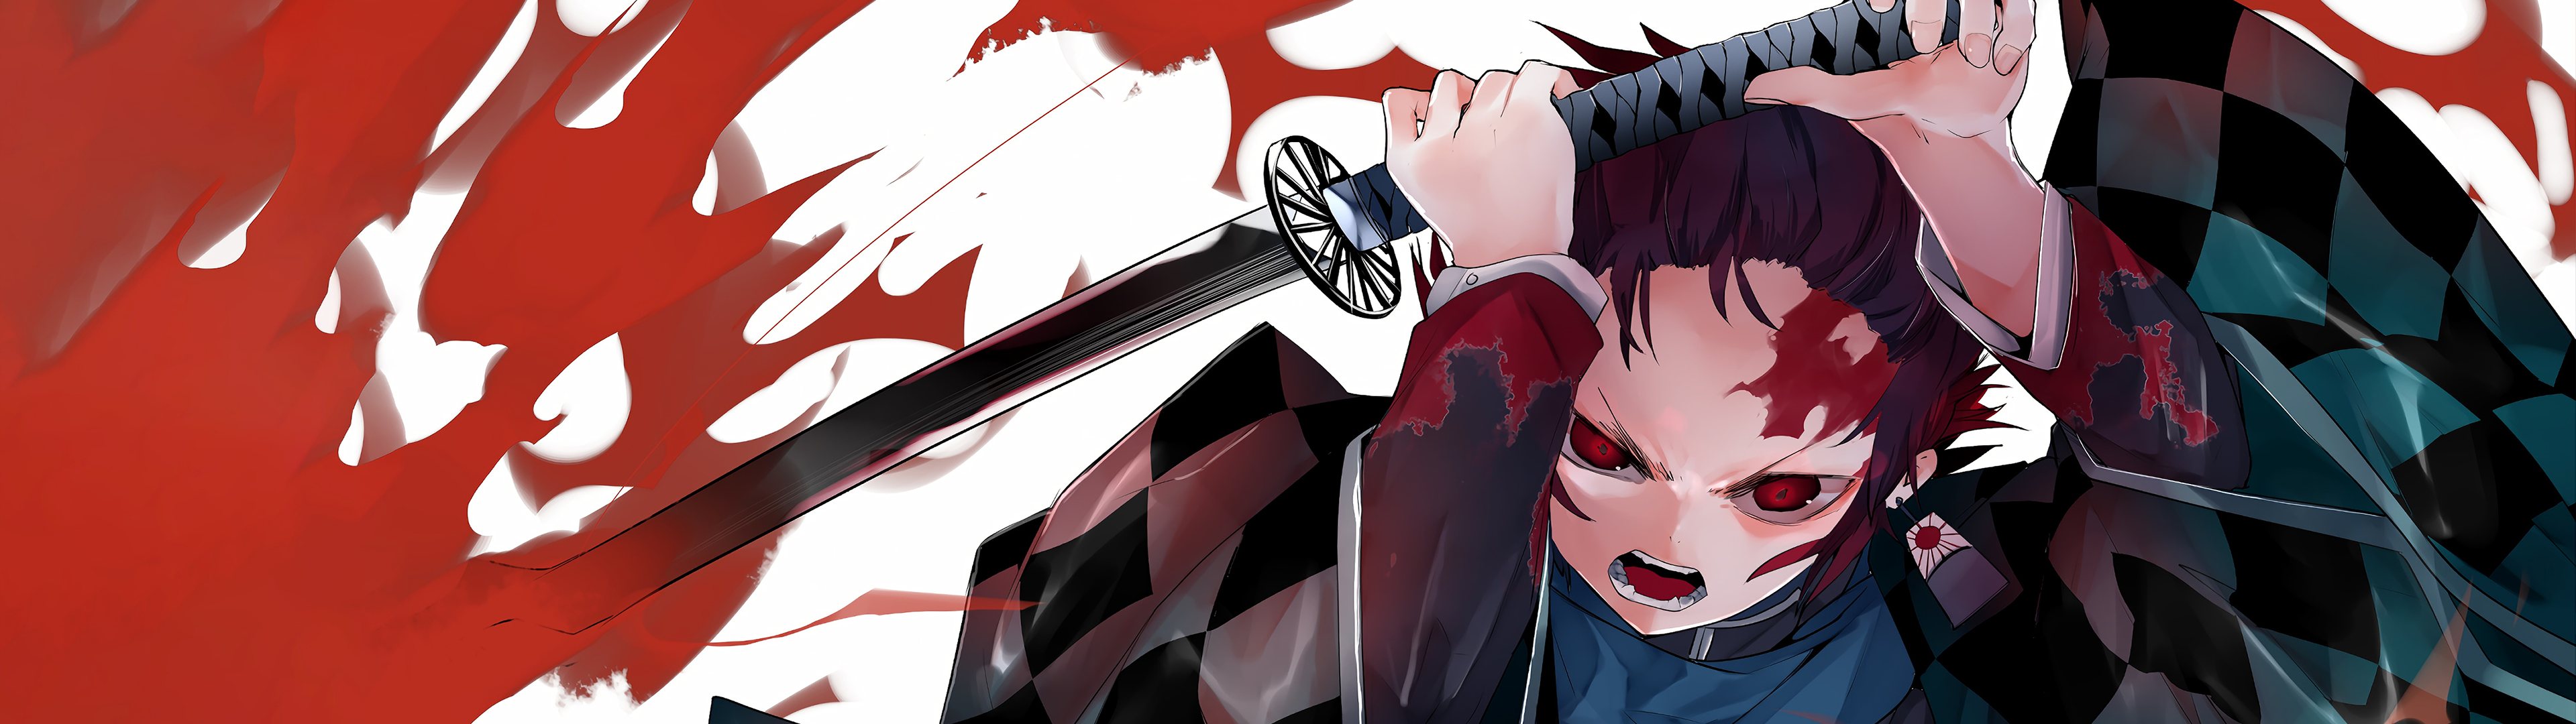 IGON - Well here it is folks, a better look at it. Meant for a dual monitor  background 3840x1080 Anime: Re Zero Download Link:  https://drive.google.com/file/d/0B275BJwx94EbS3BBZVZES3dnSkU/view?usp=sharing  ~=B0ss=~ | Facebook